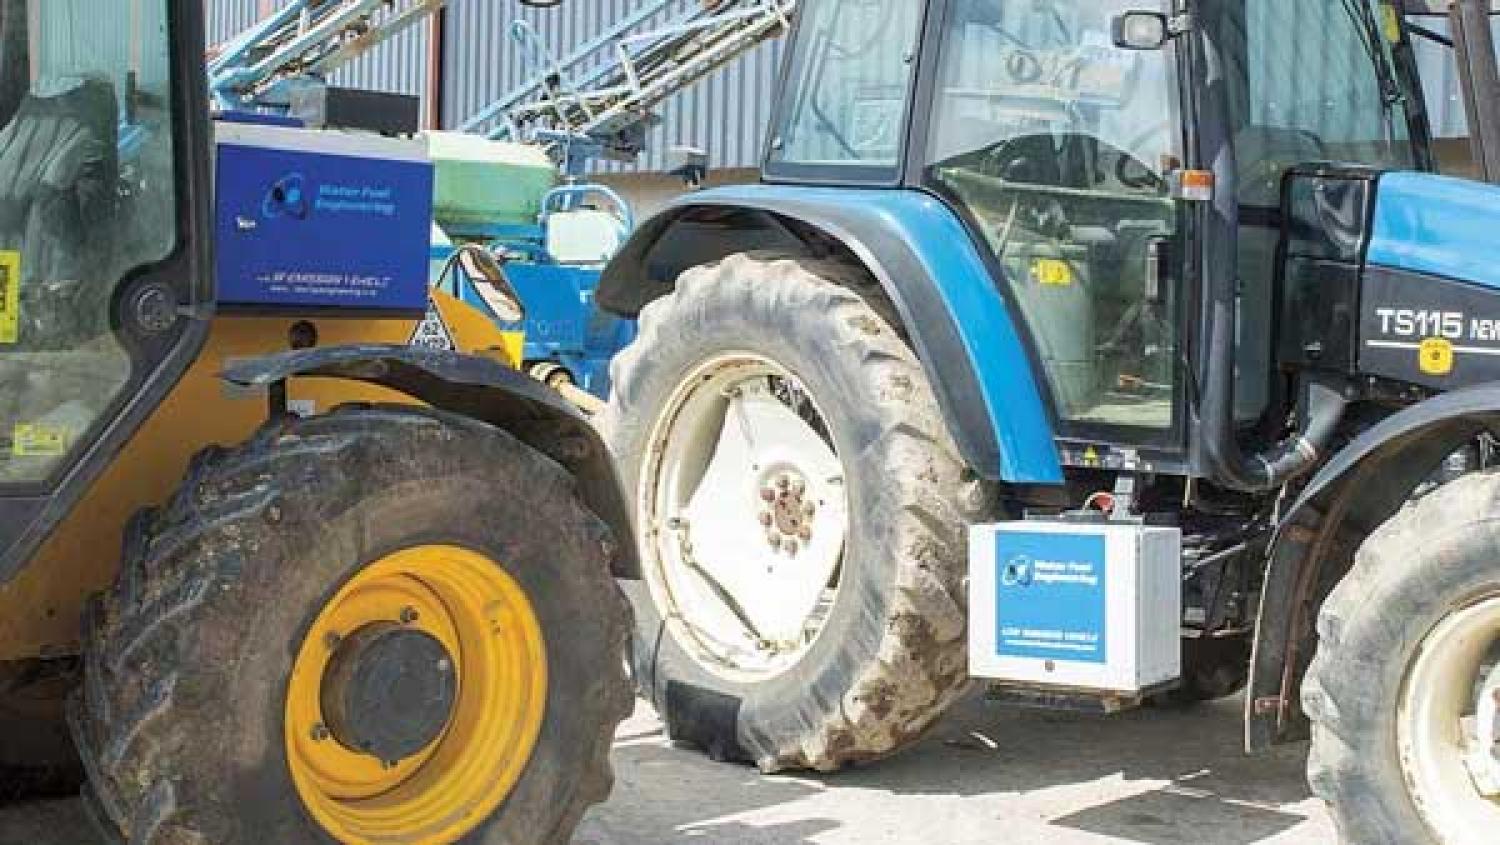 Hydrolysers on the Barron's JCB telehandler and New Holland TS115 tractor